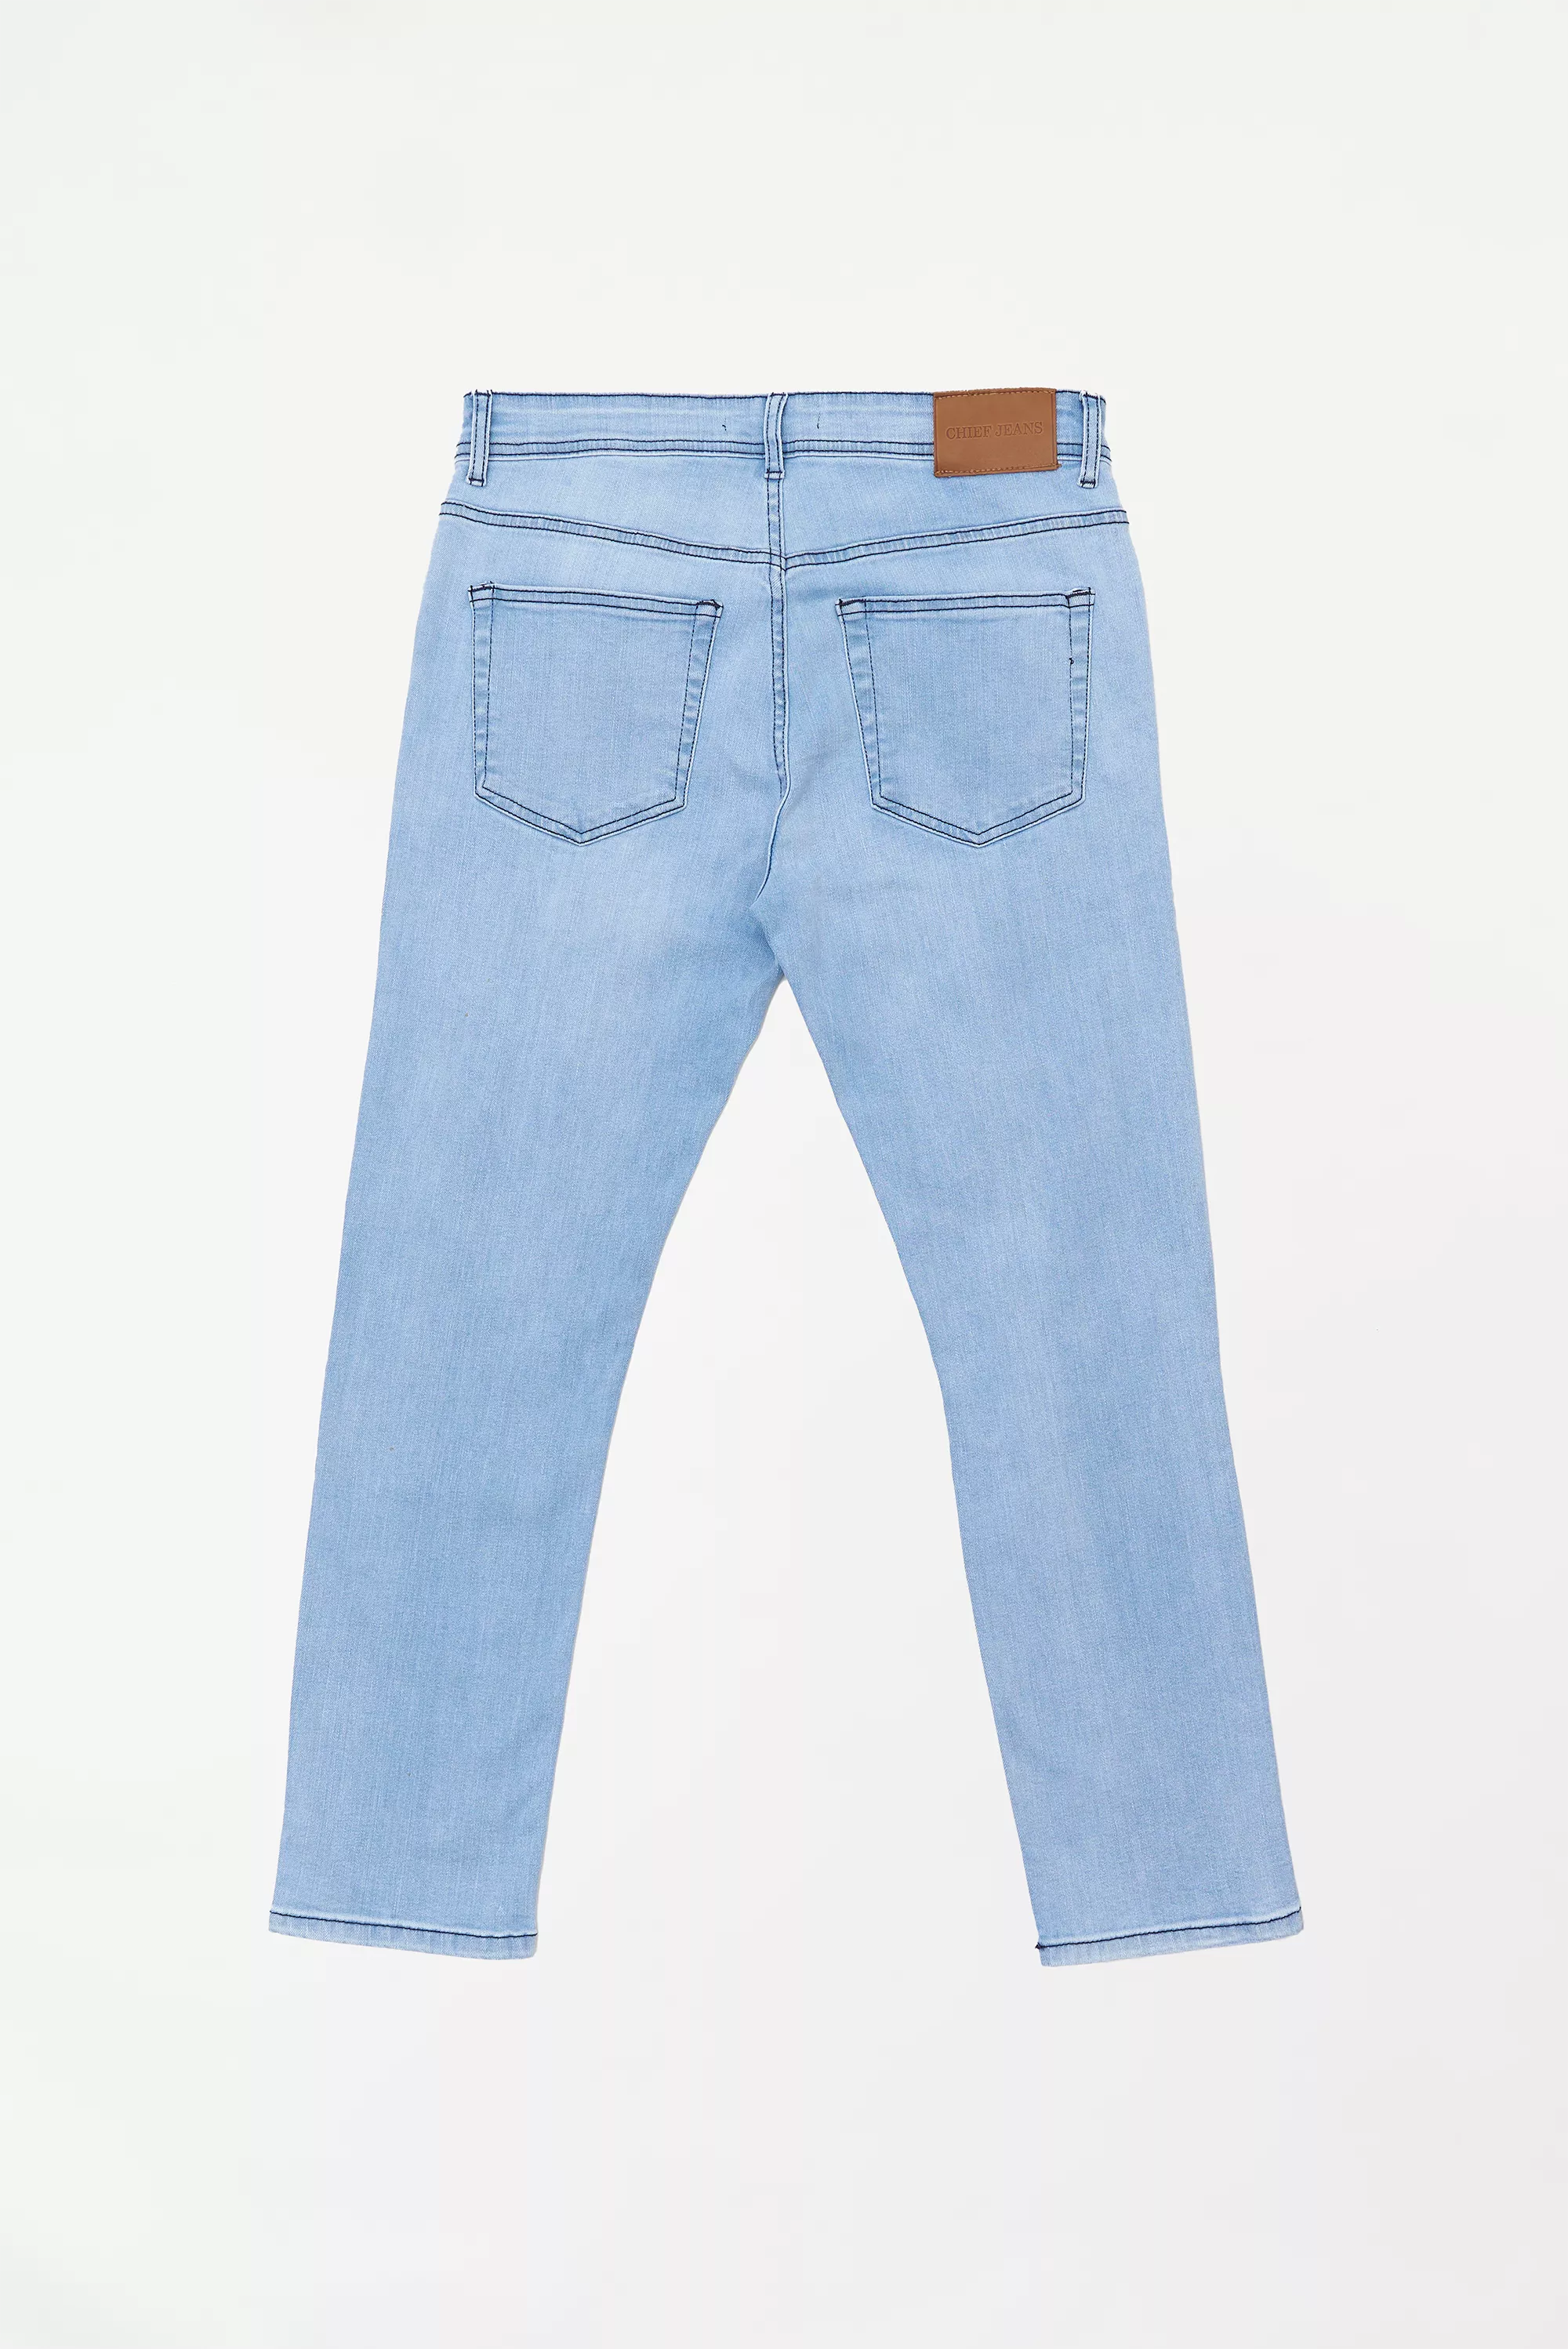 Men's Ripped Tapered Fit Sky Blue Jeans